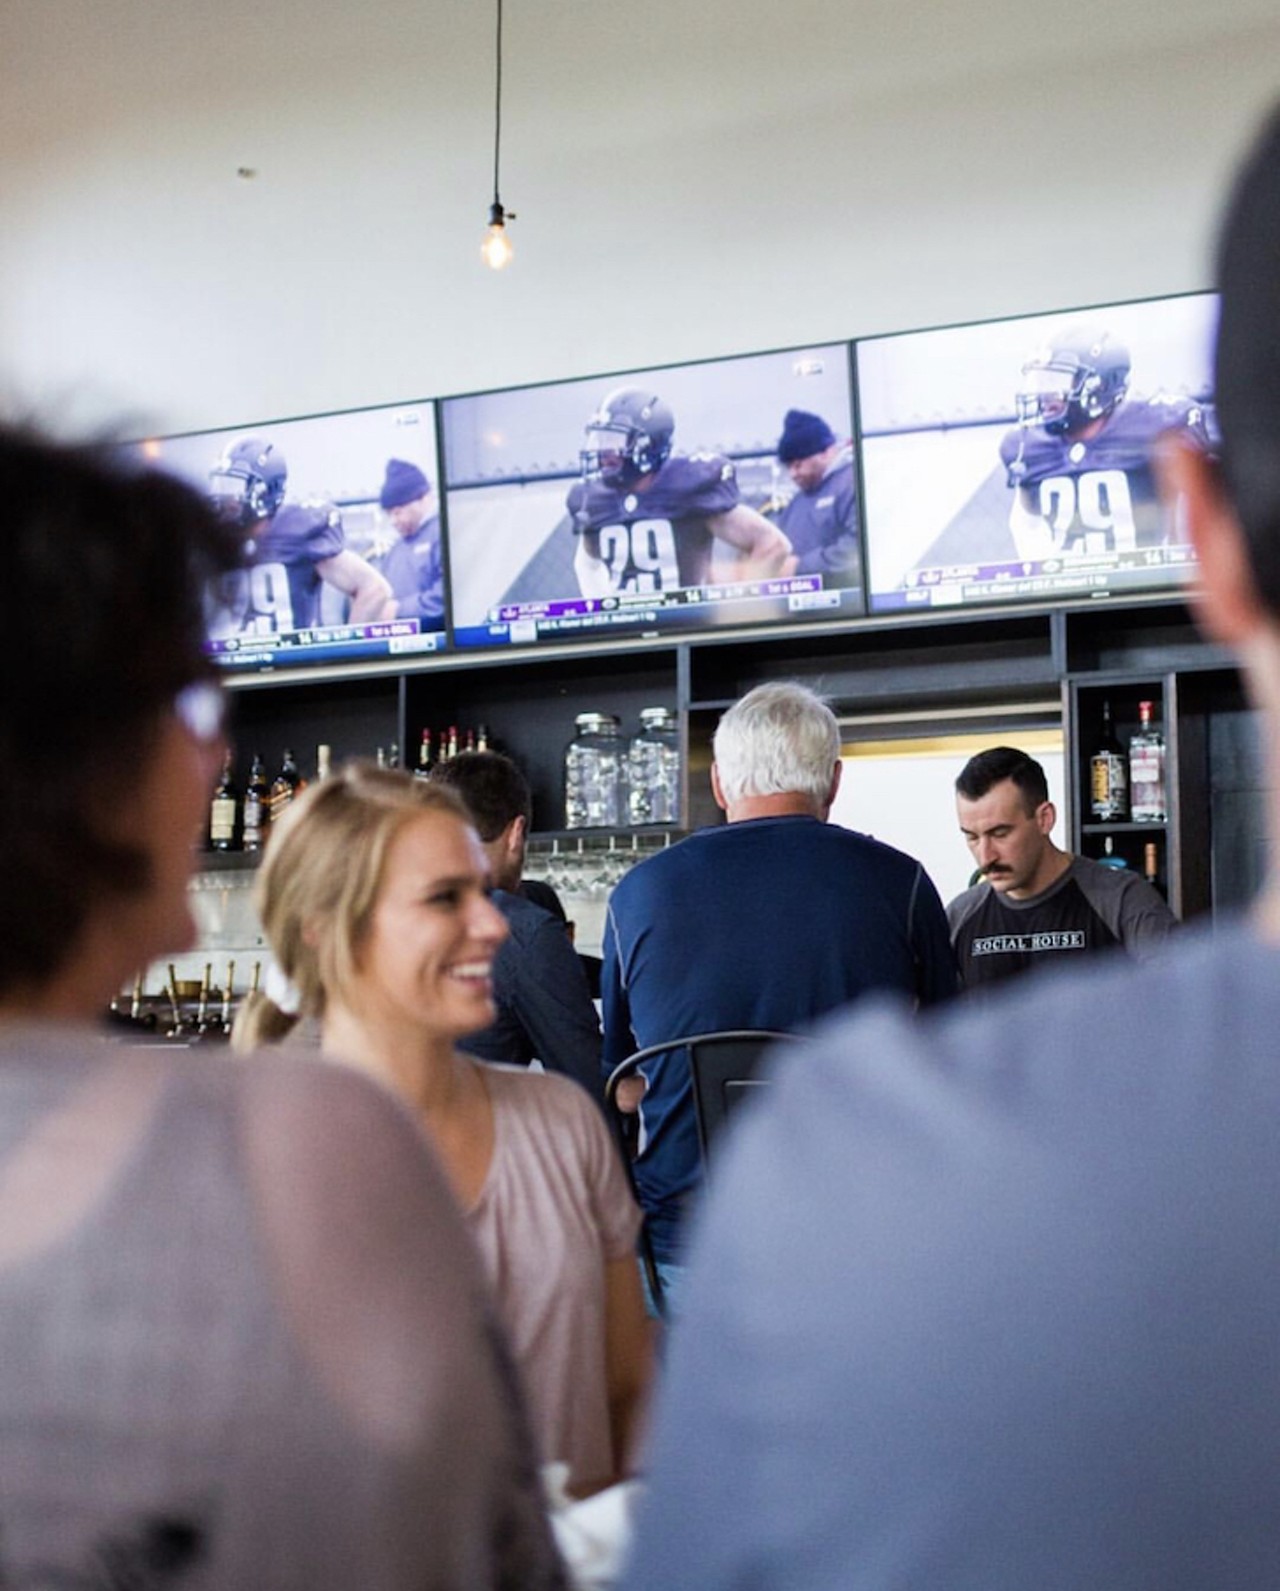 Social House  
6310 N Florida Ave, Tampa, 813-321-2329
A sports bar in the heart of Seminole Heights serving up pitchers, now that&#146;s a win. Swing by and grab a cocktail on tap or some elevated bar food with house-made sauces. 
Photo via Social House/Instagram